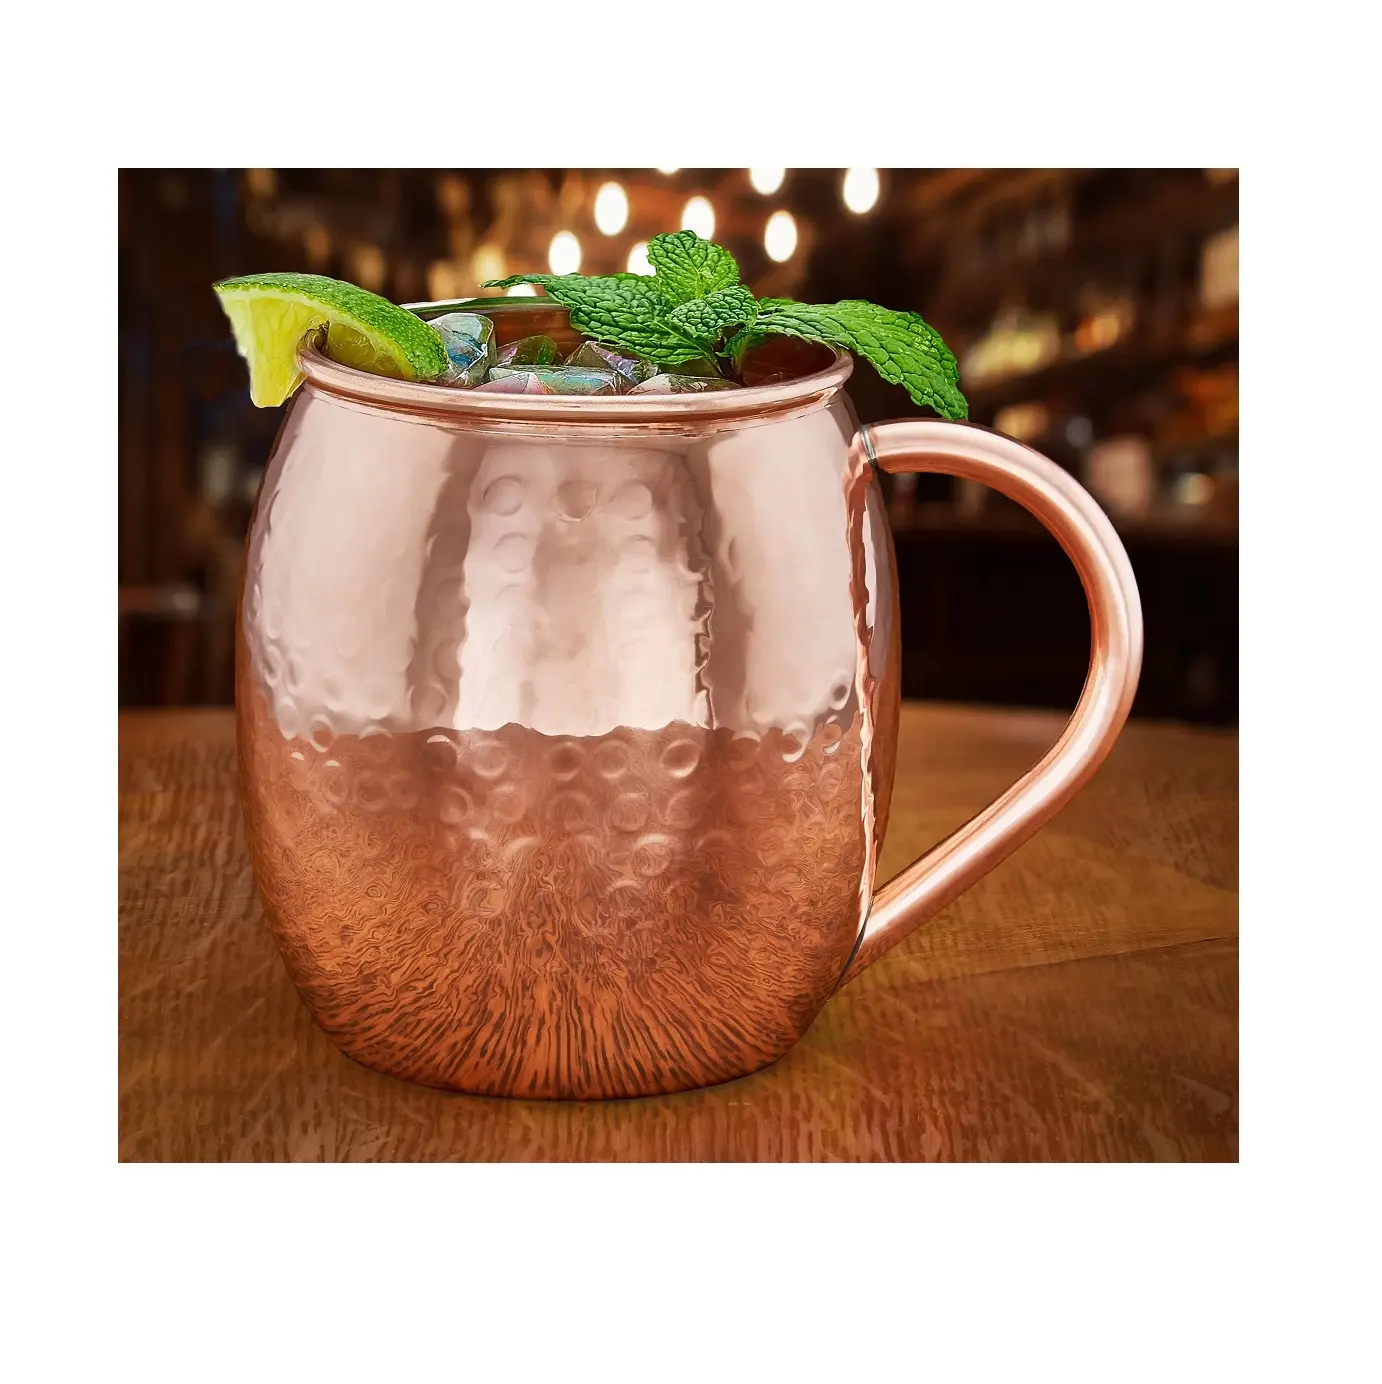 Antique design Moscow Mule Mugs For Ginger Beer Pure Copper Mug With Brass Handle Moscow Mule designed in India